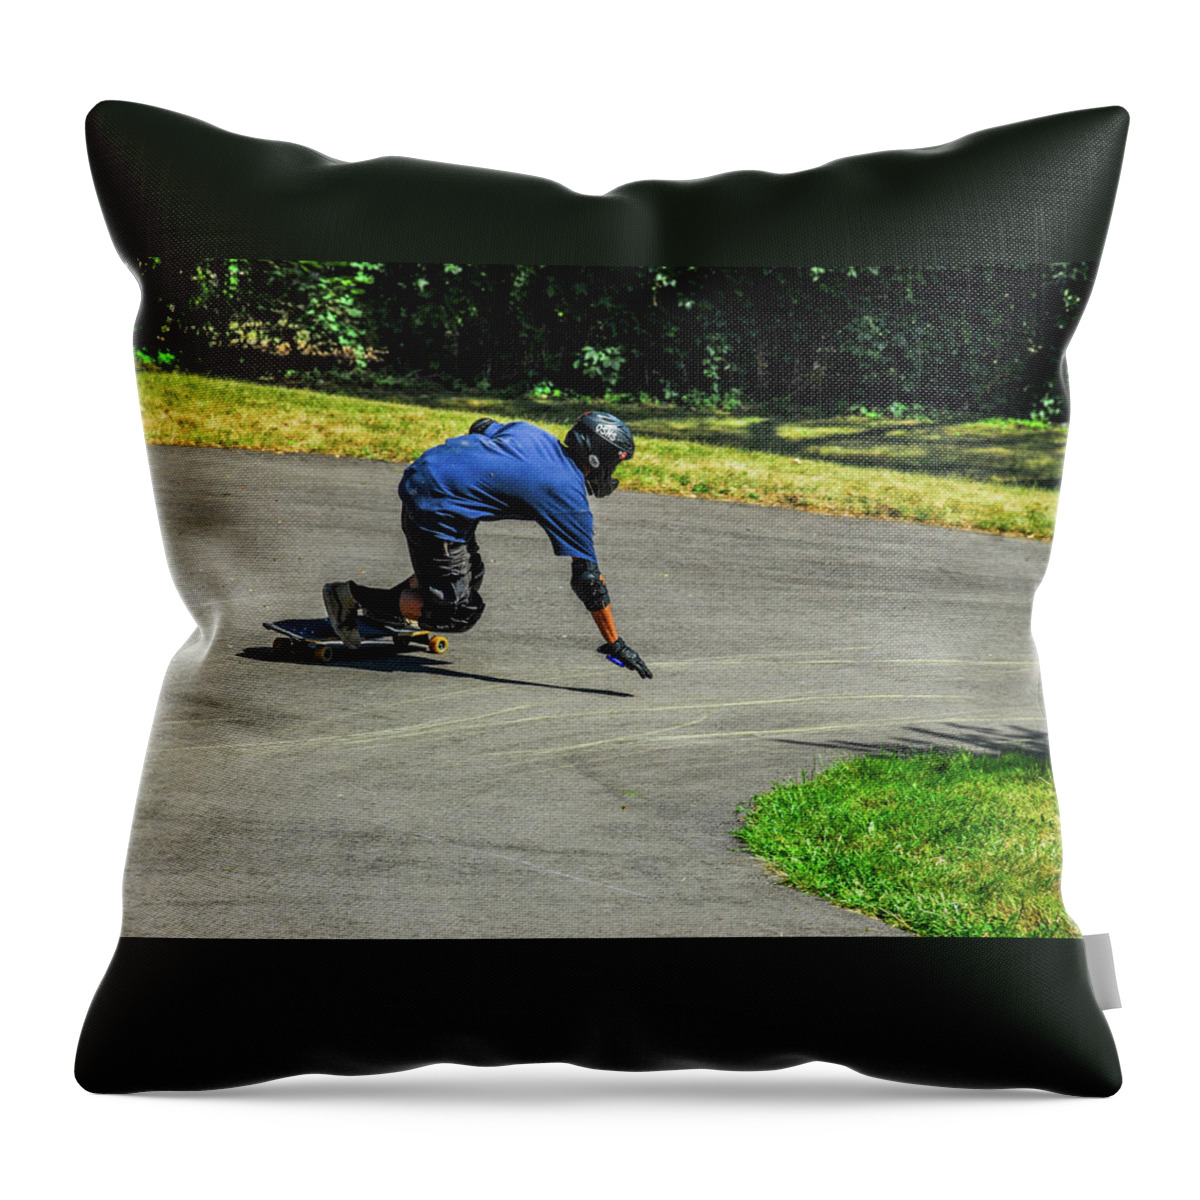 Skater Throw Pillow featuring the photograph 150 by Ee Photography